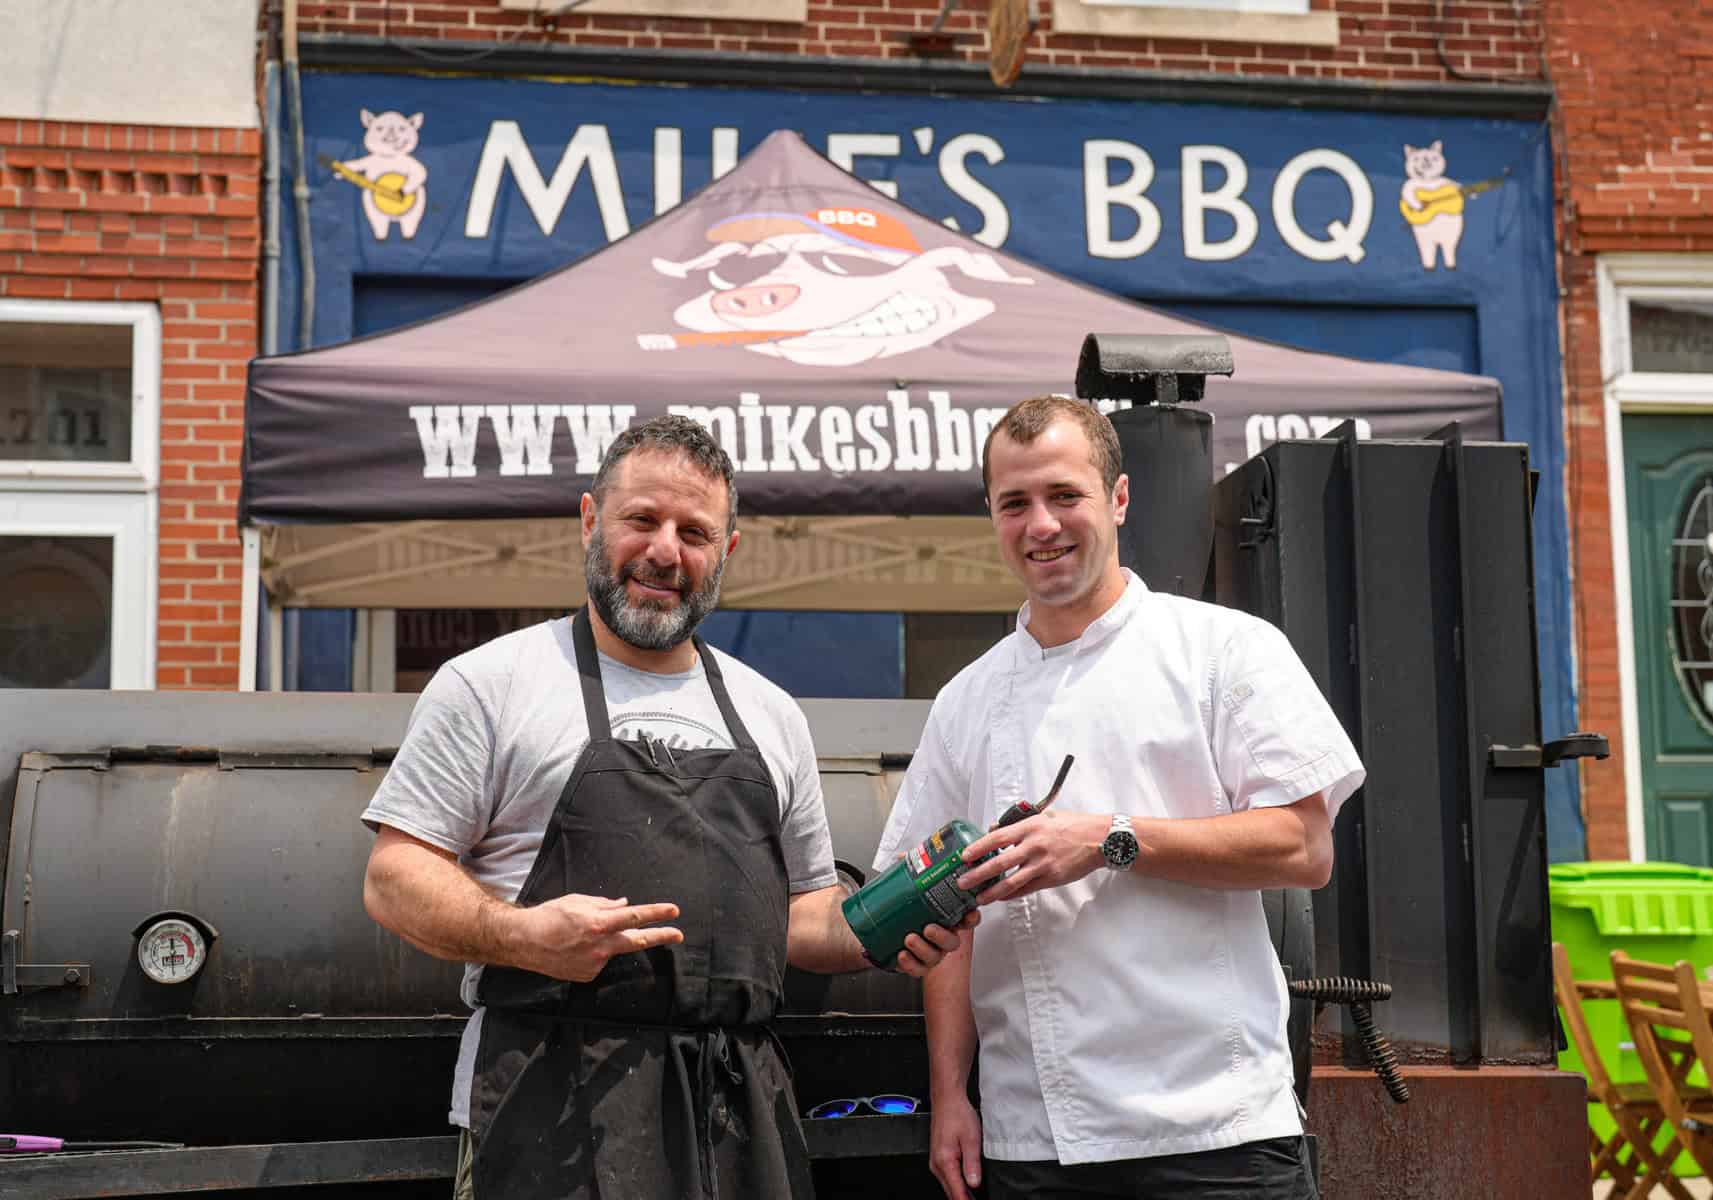 Mike’s BBQ under new ownership